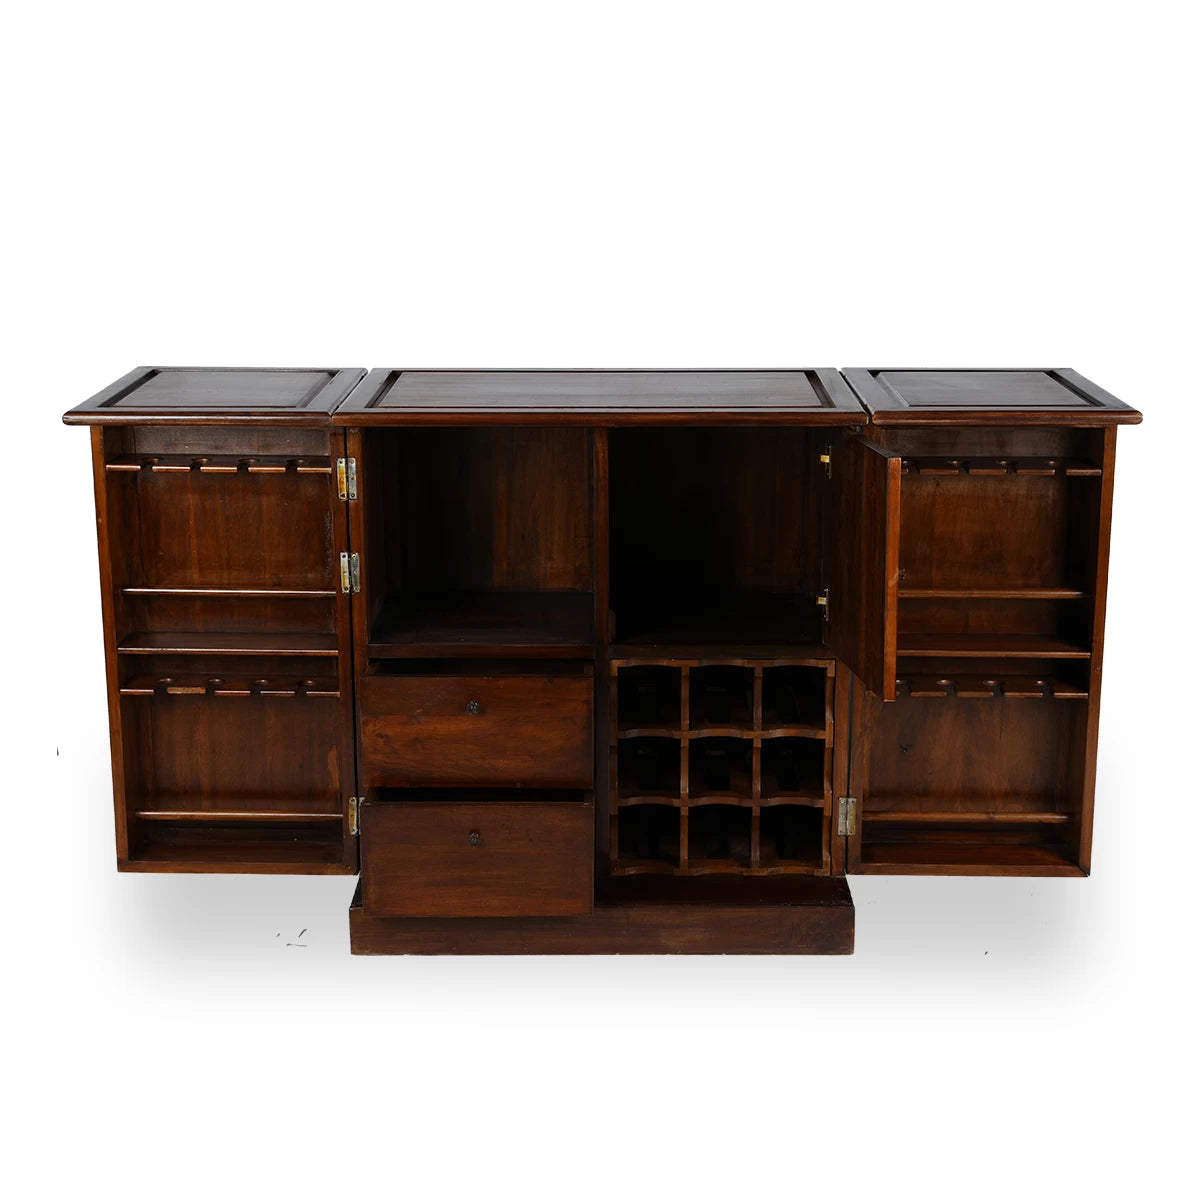 Inside View of Wooden Bar Counter Cabinet with Beverage Storage Compartments